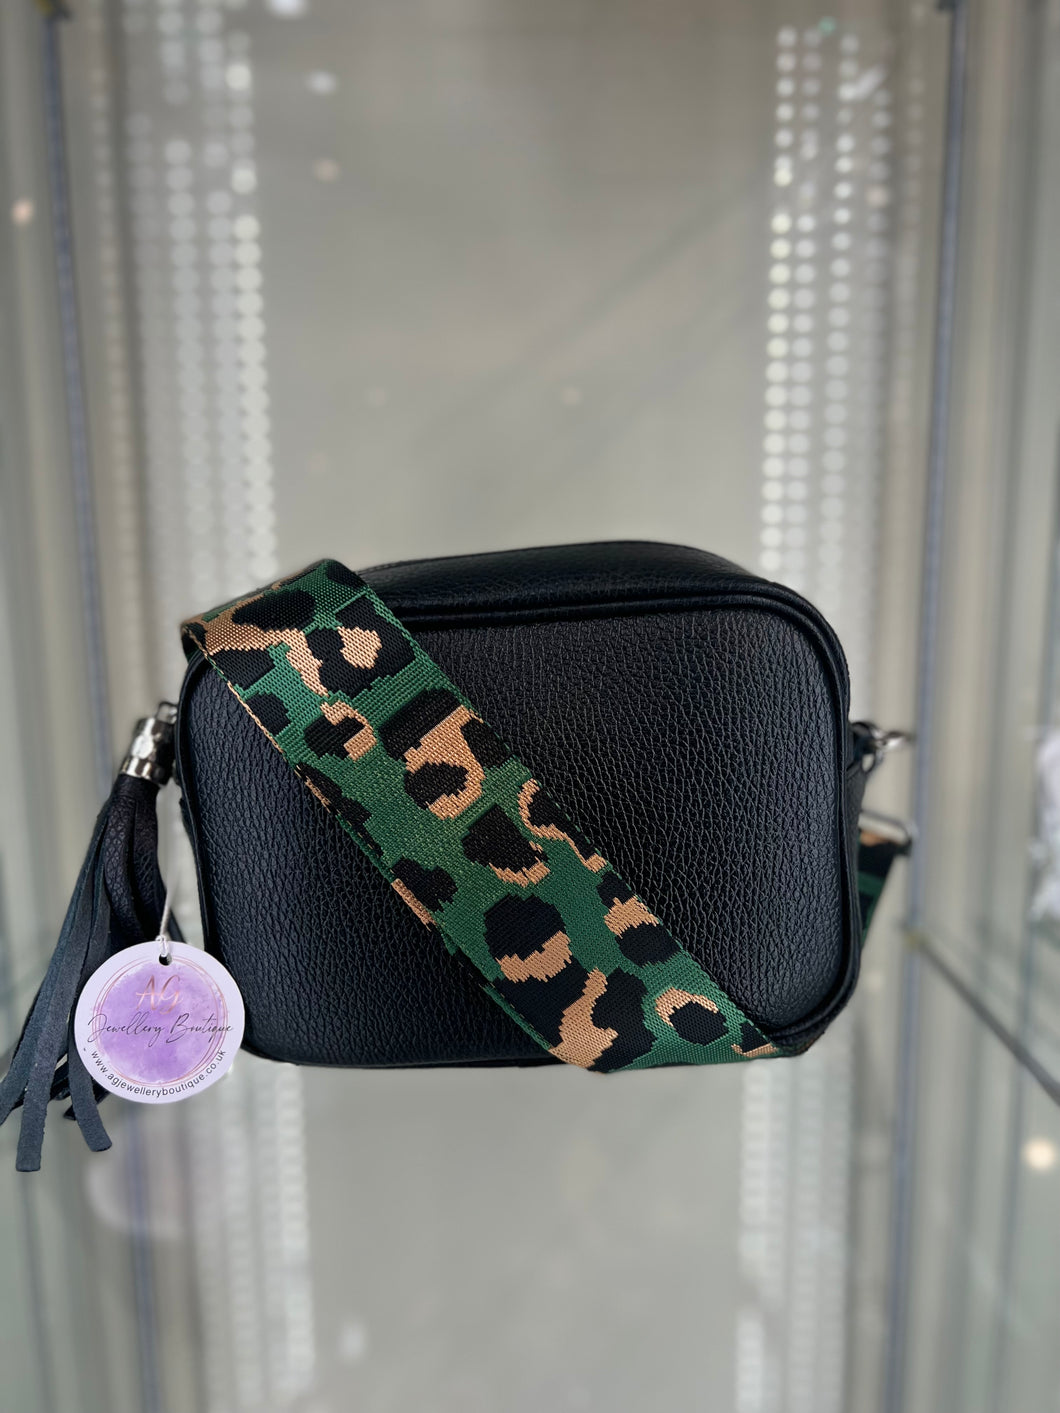 Real leather Black crossbody bag with  animal print green  strap